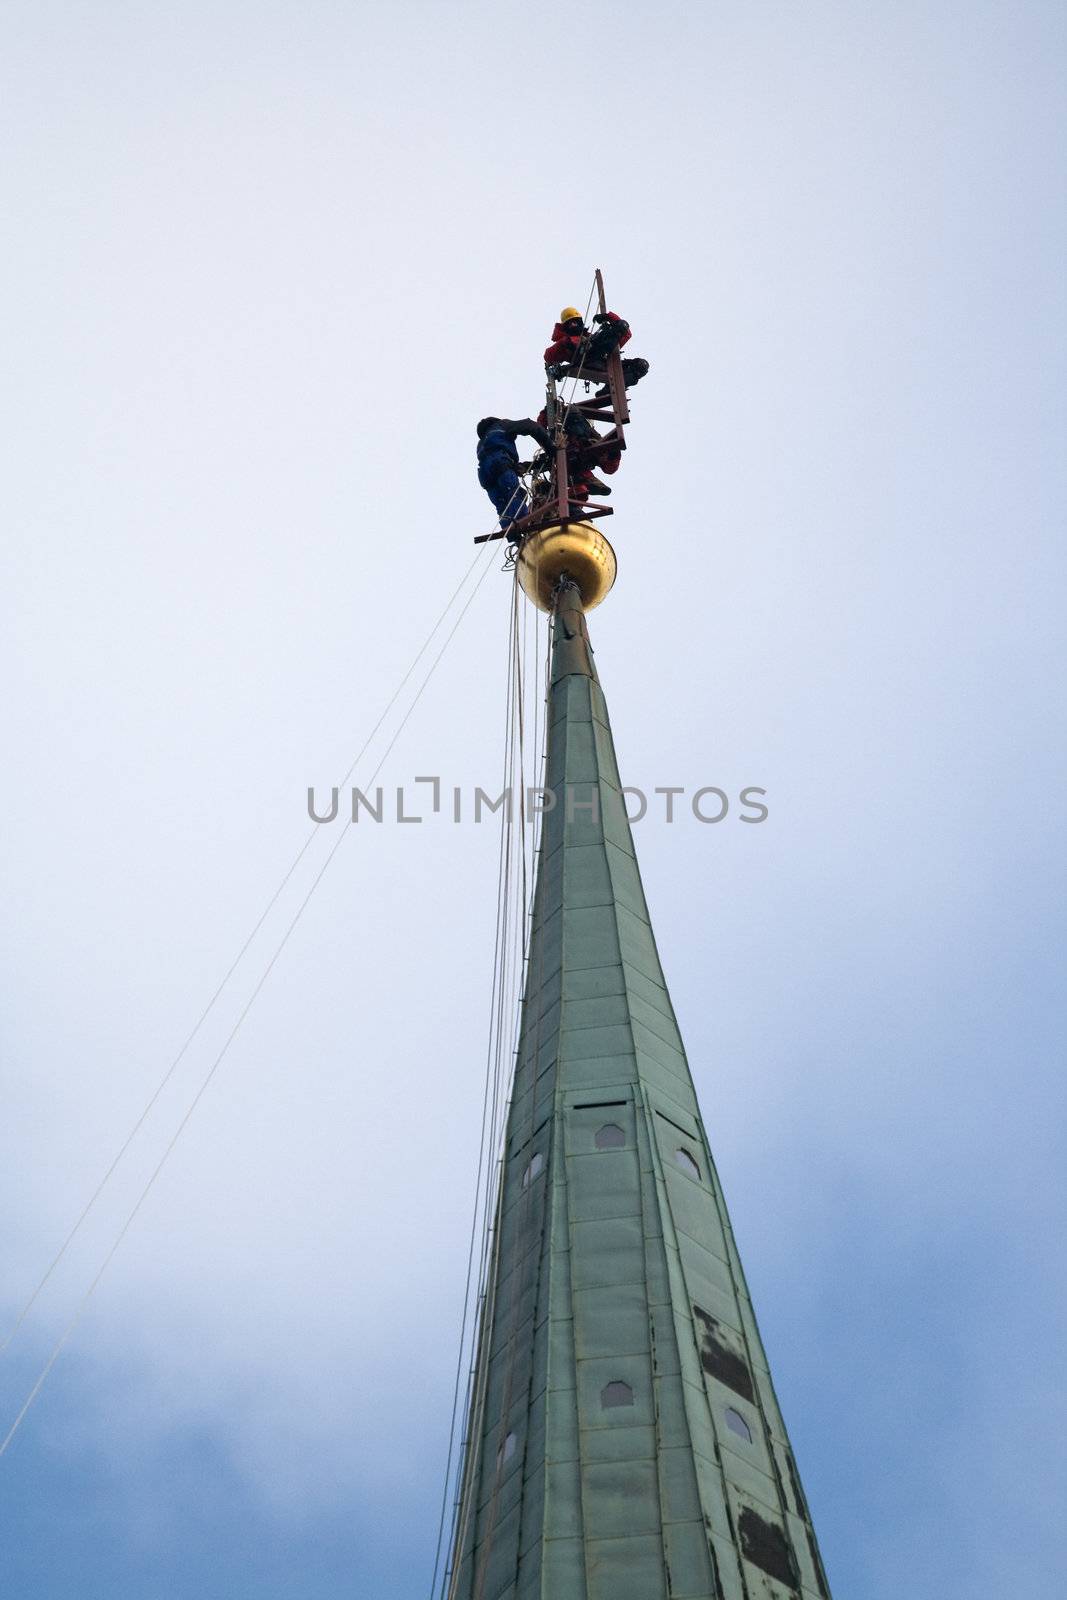 Many Industrial alpinists working at church tower